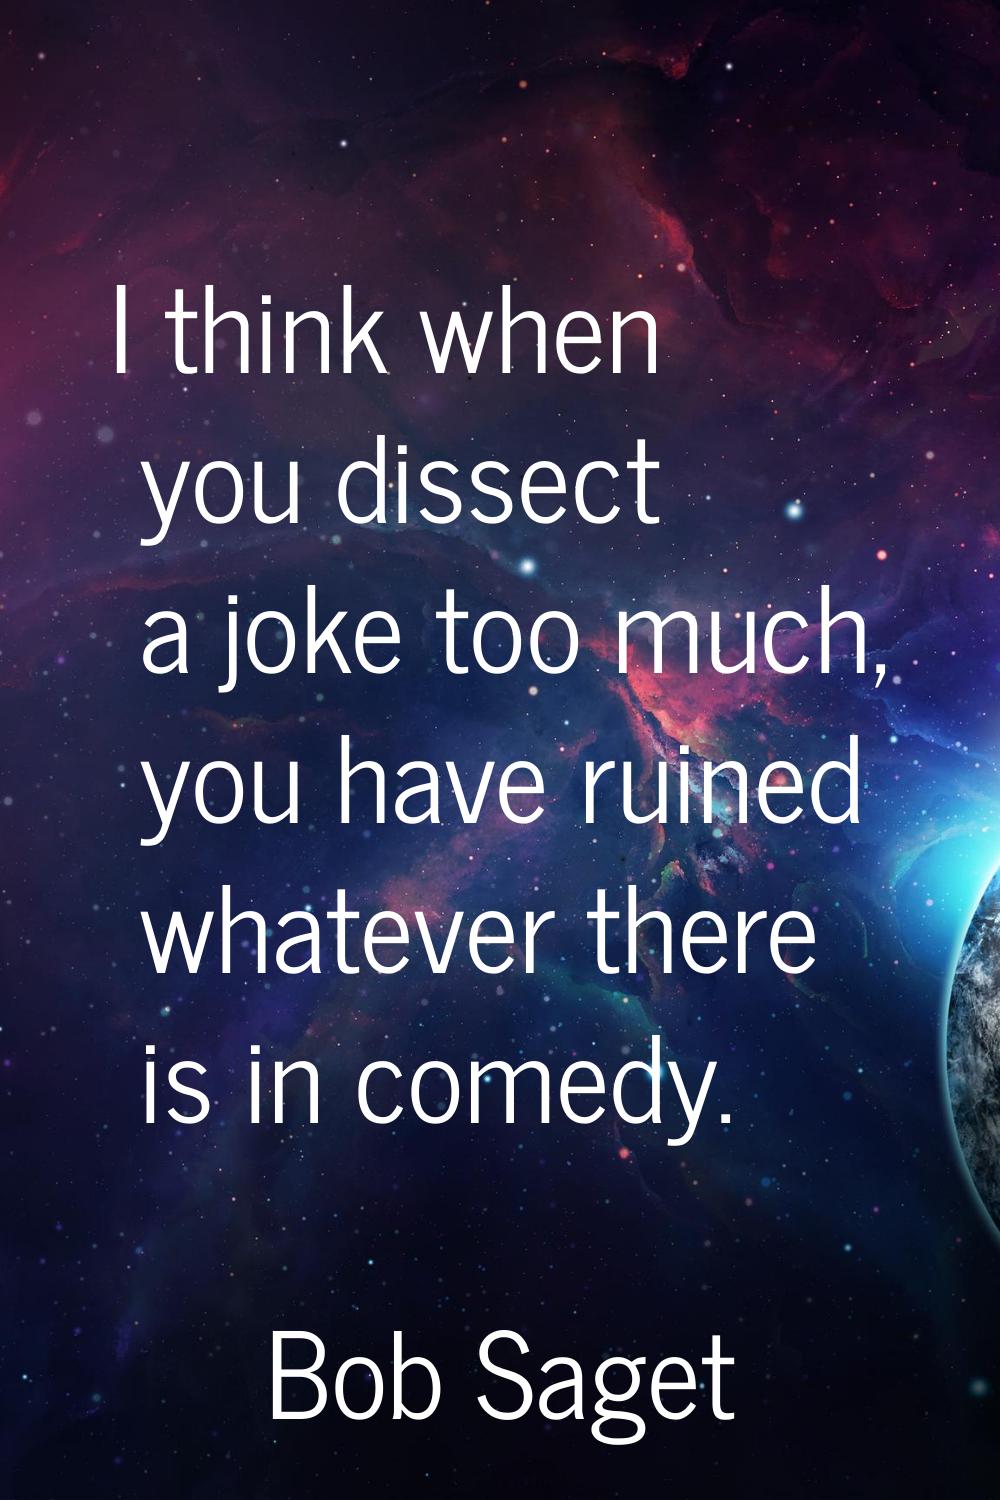 I think when you dissect a joke too much, you have ruined whatever there is in comedy.